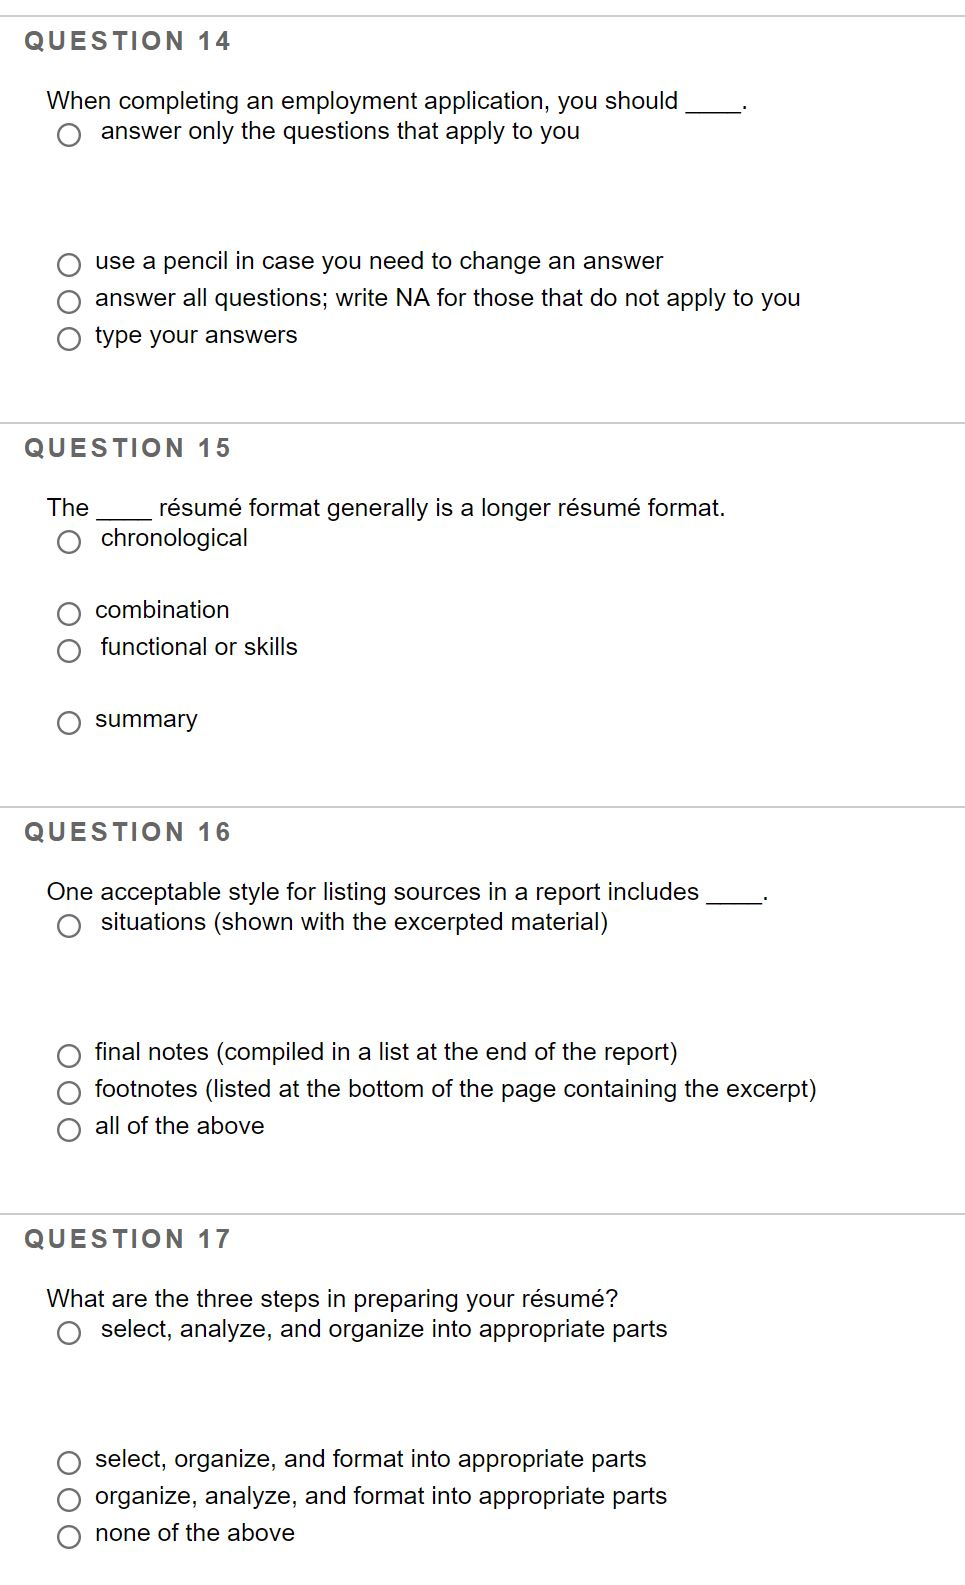 Sample answers for job application questions